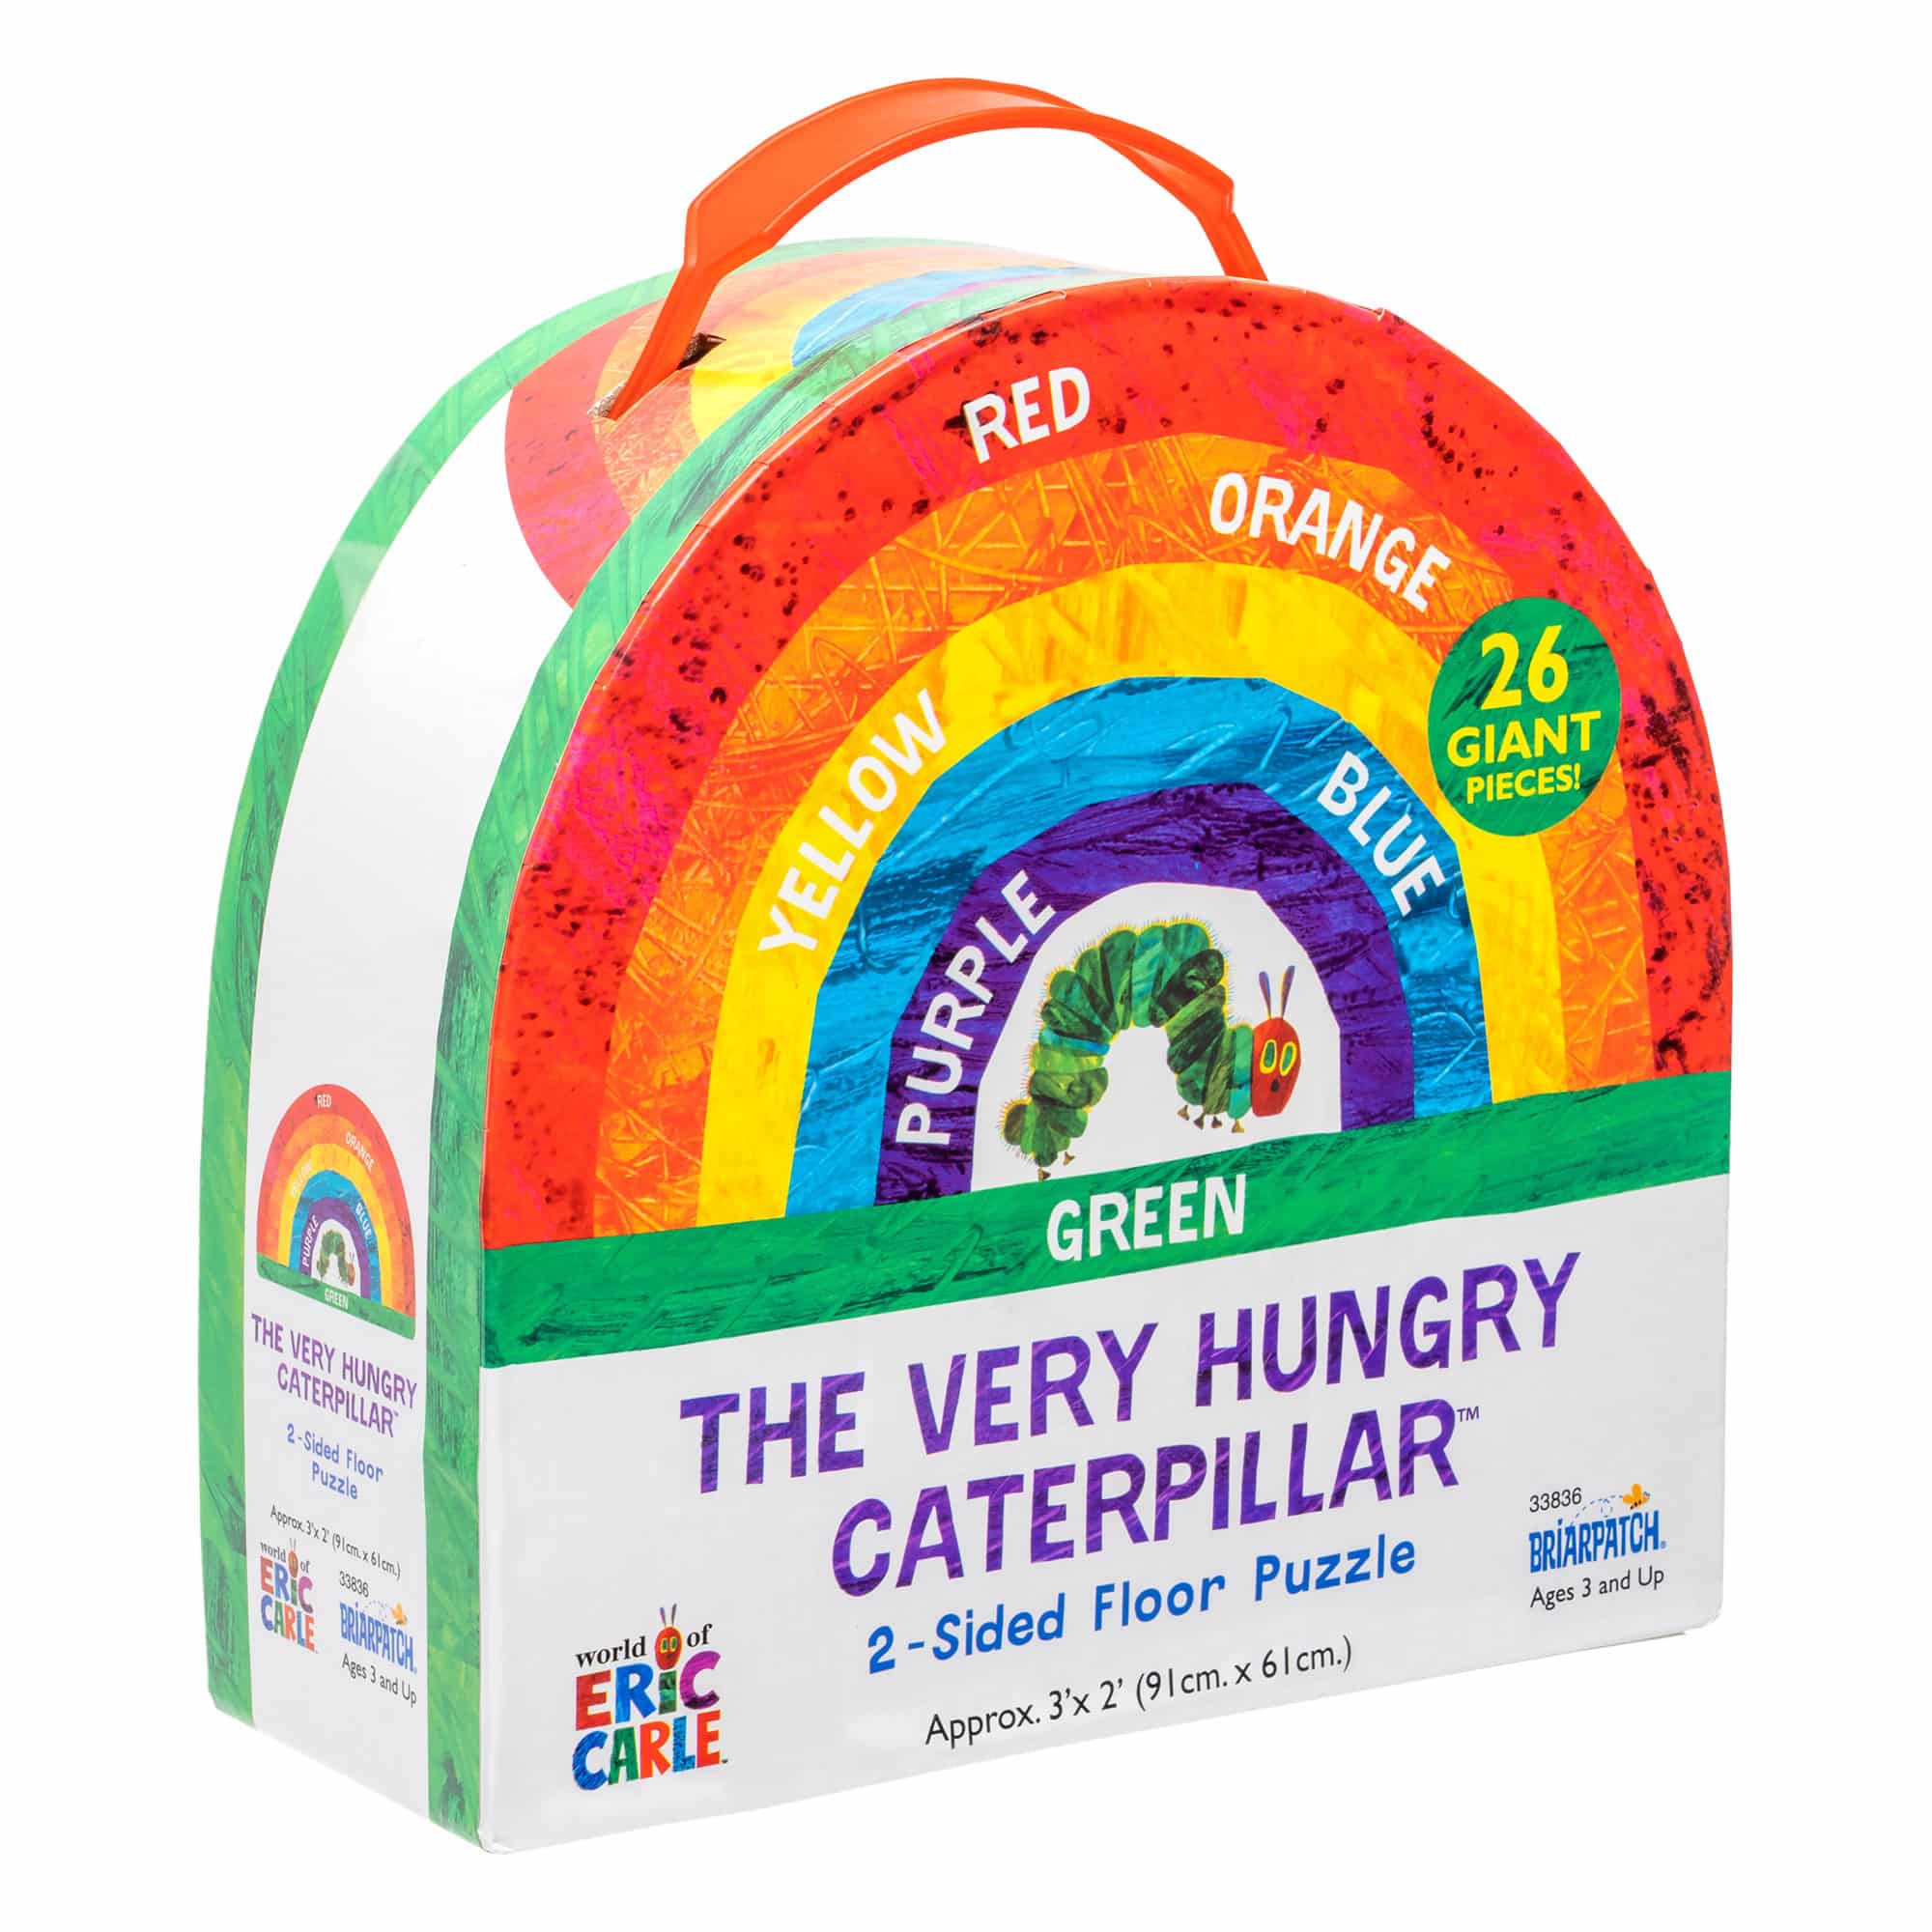 The Very Hungry Caterpillar - 2 Sided Floor Puzzle - 26 Pieces